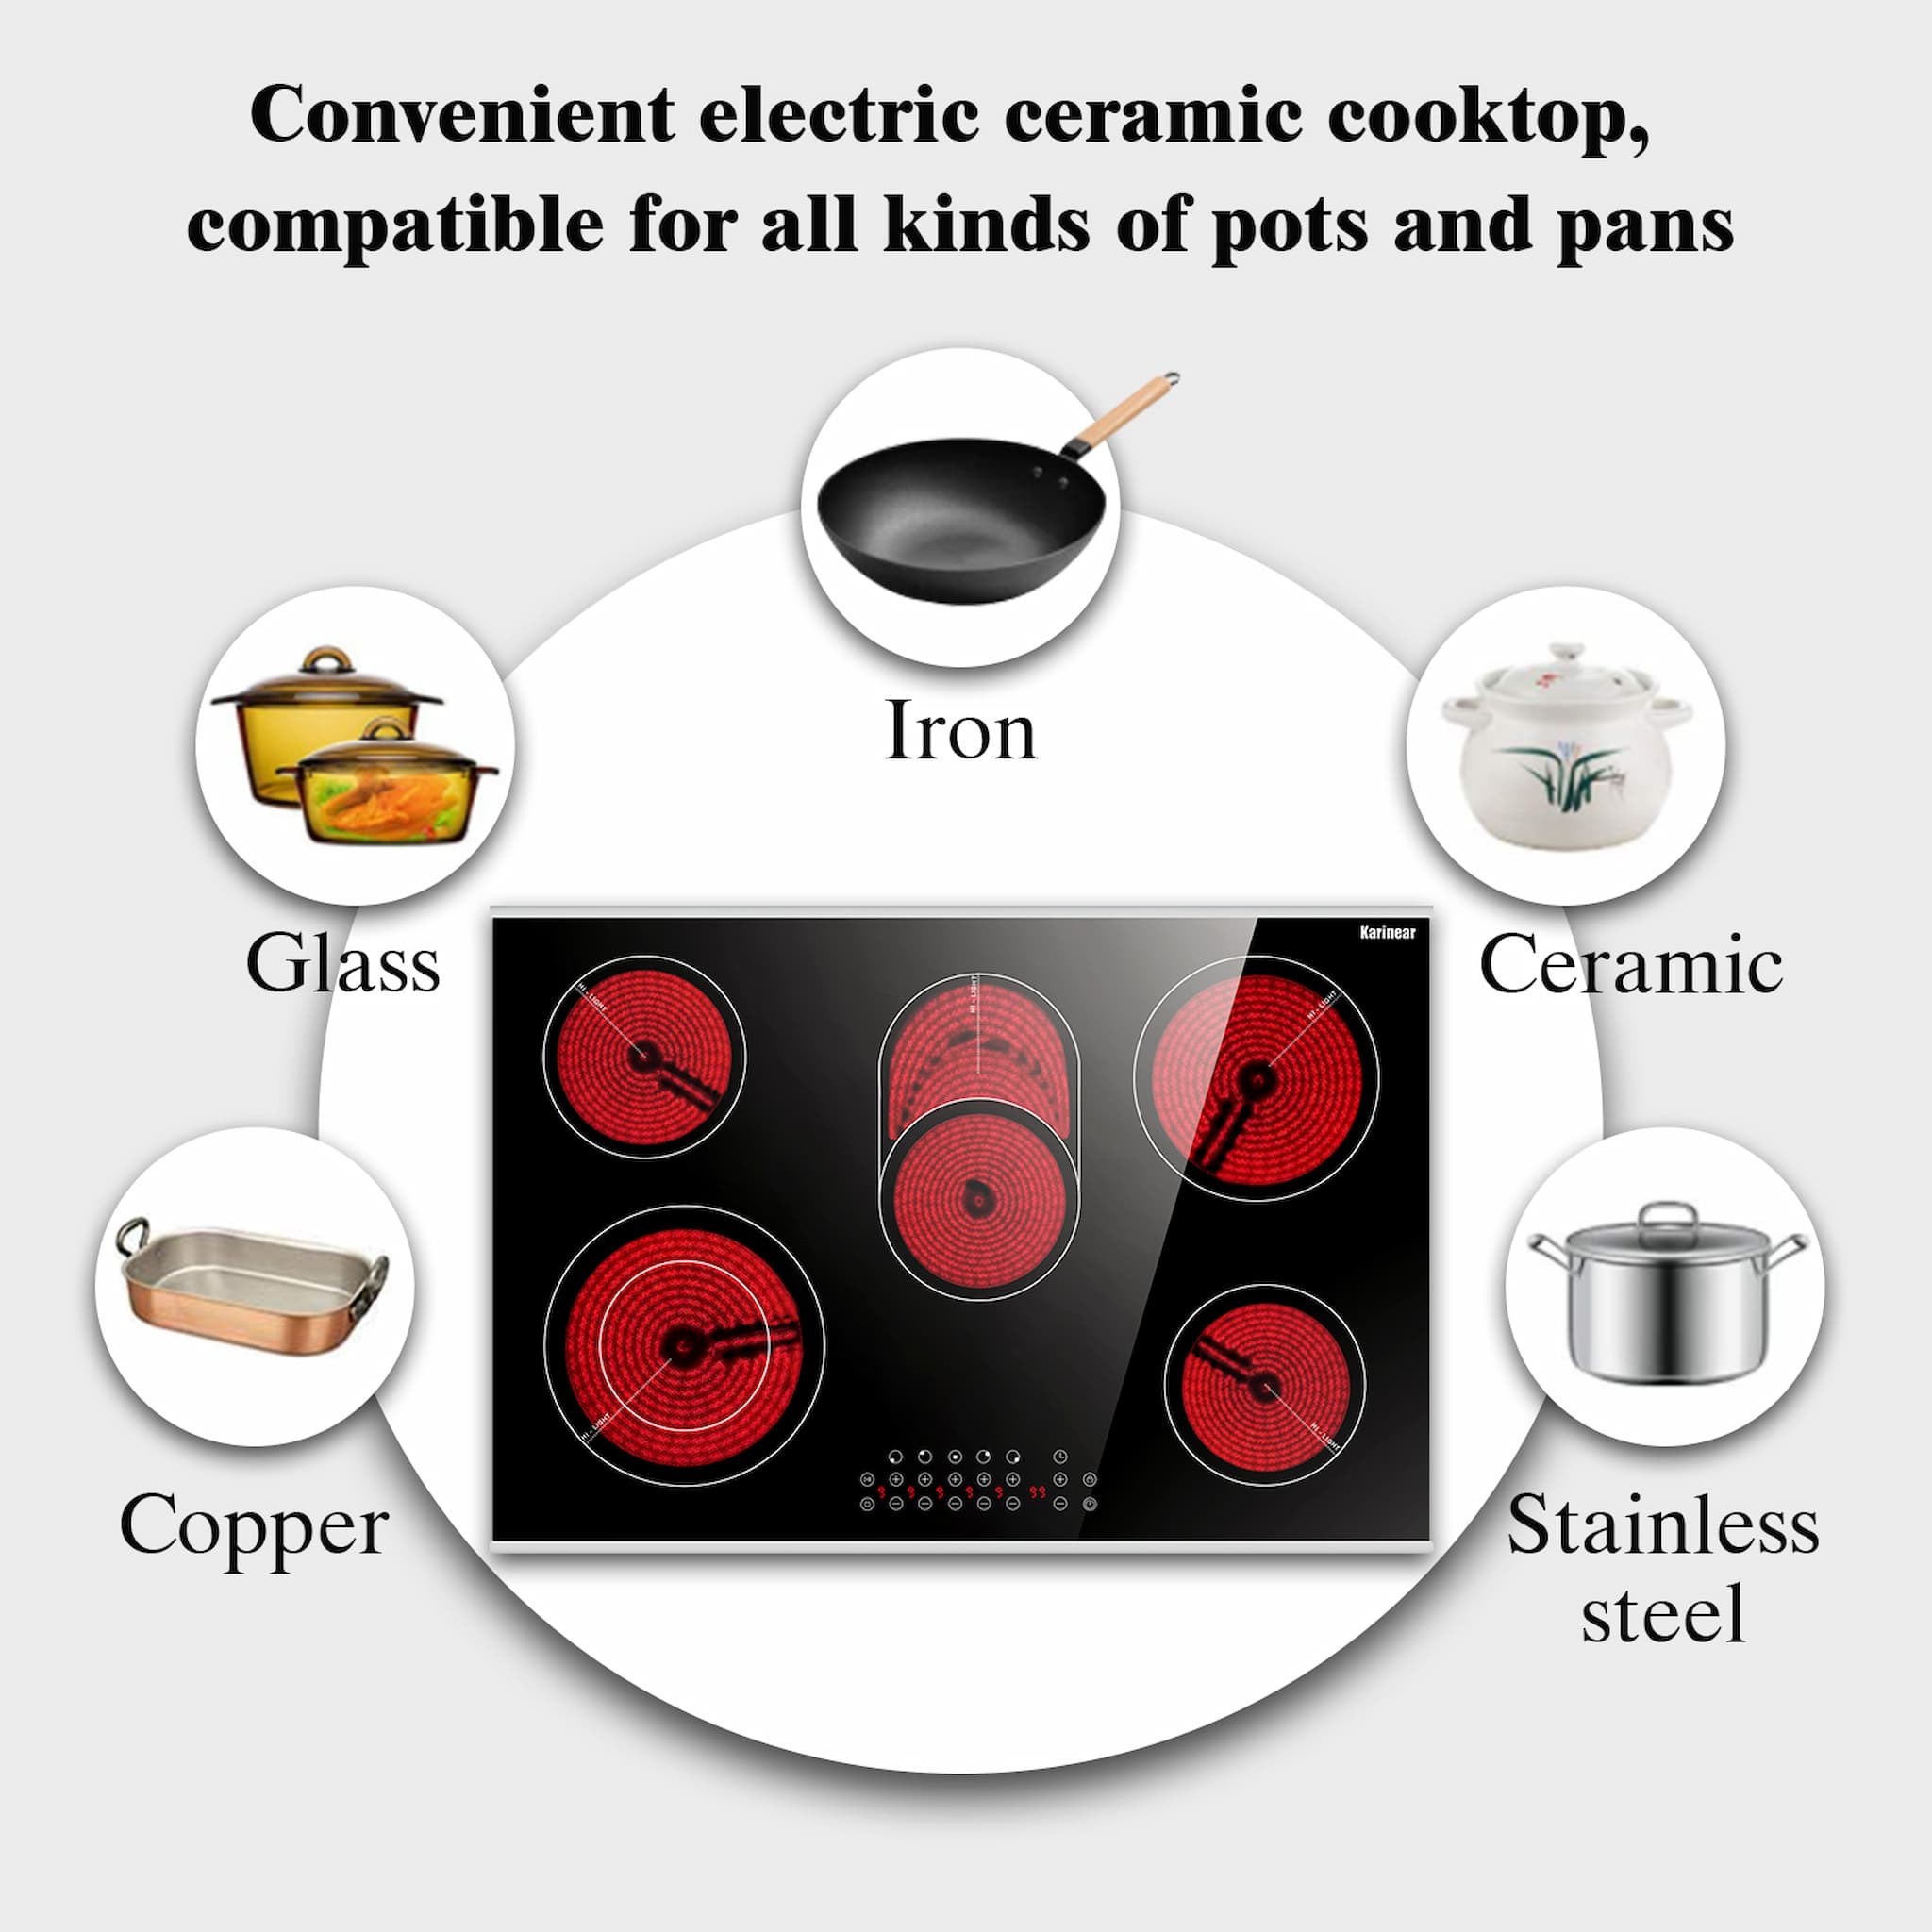 One advantage of this electric radiant cooktop is that we have front and back metal frames, which can prevent glass breakage, effectively increase the life of the glass cooktop.